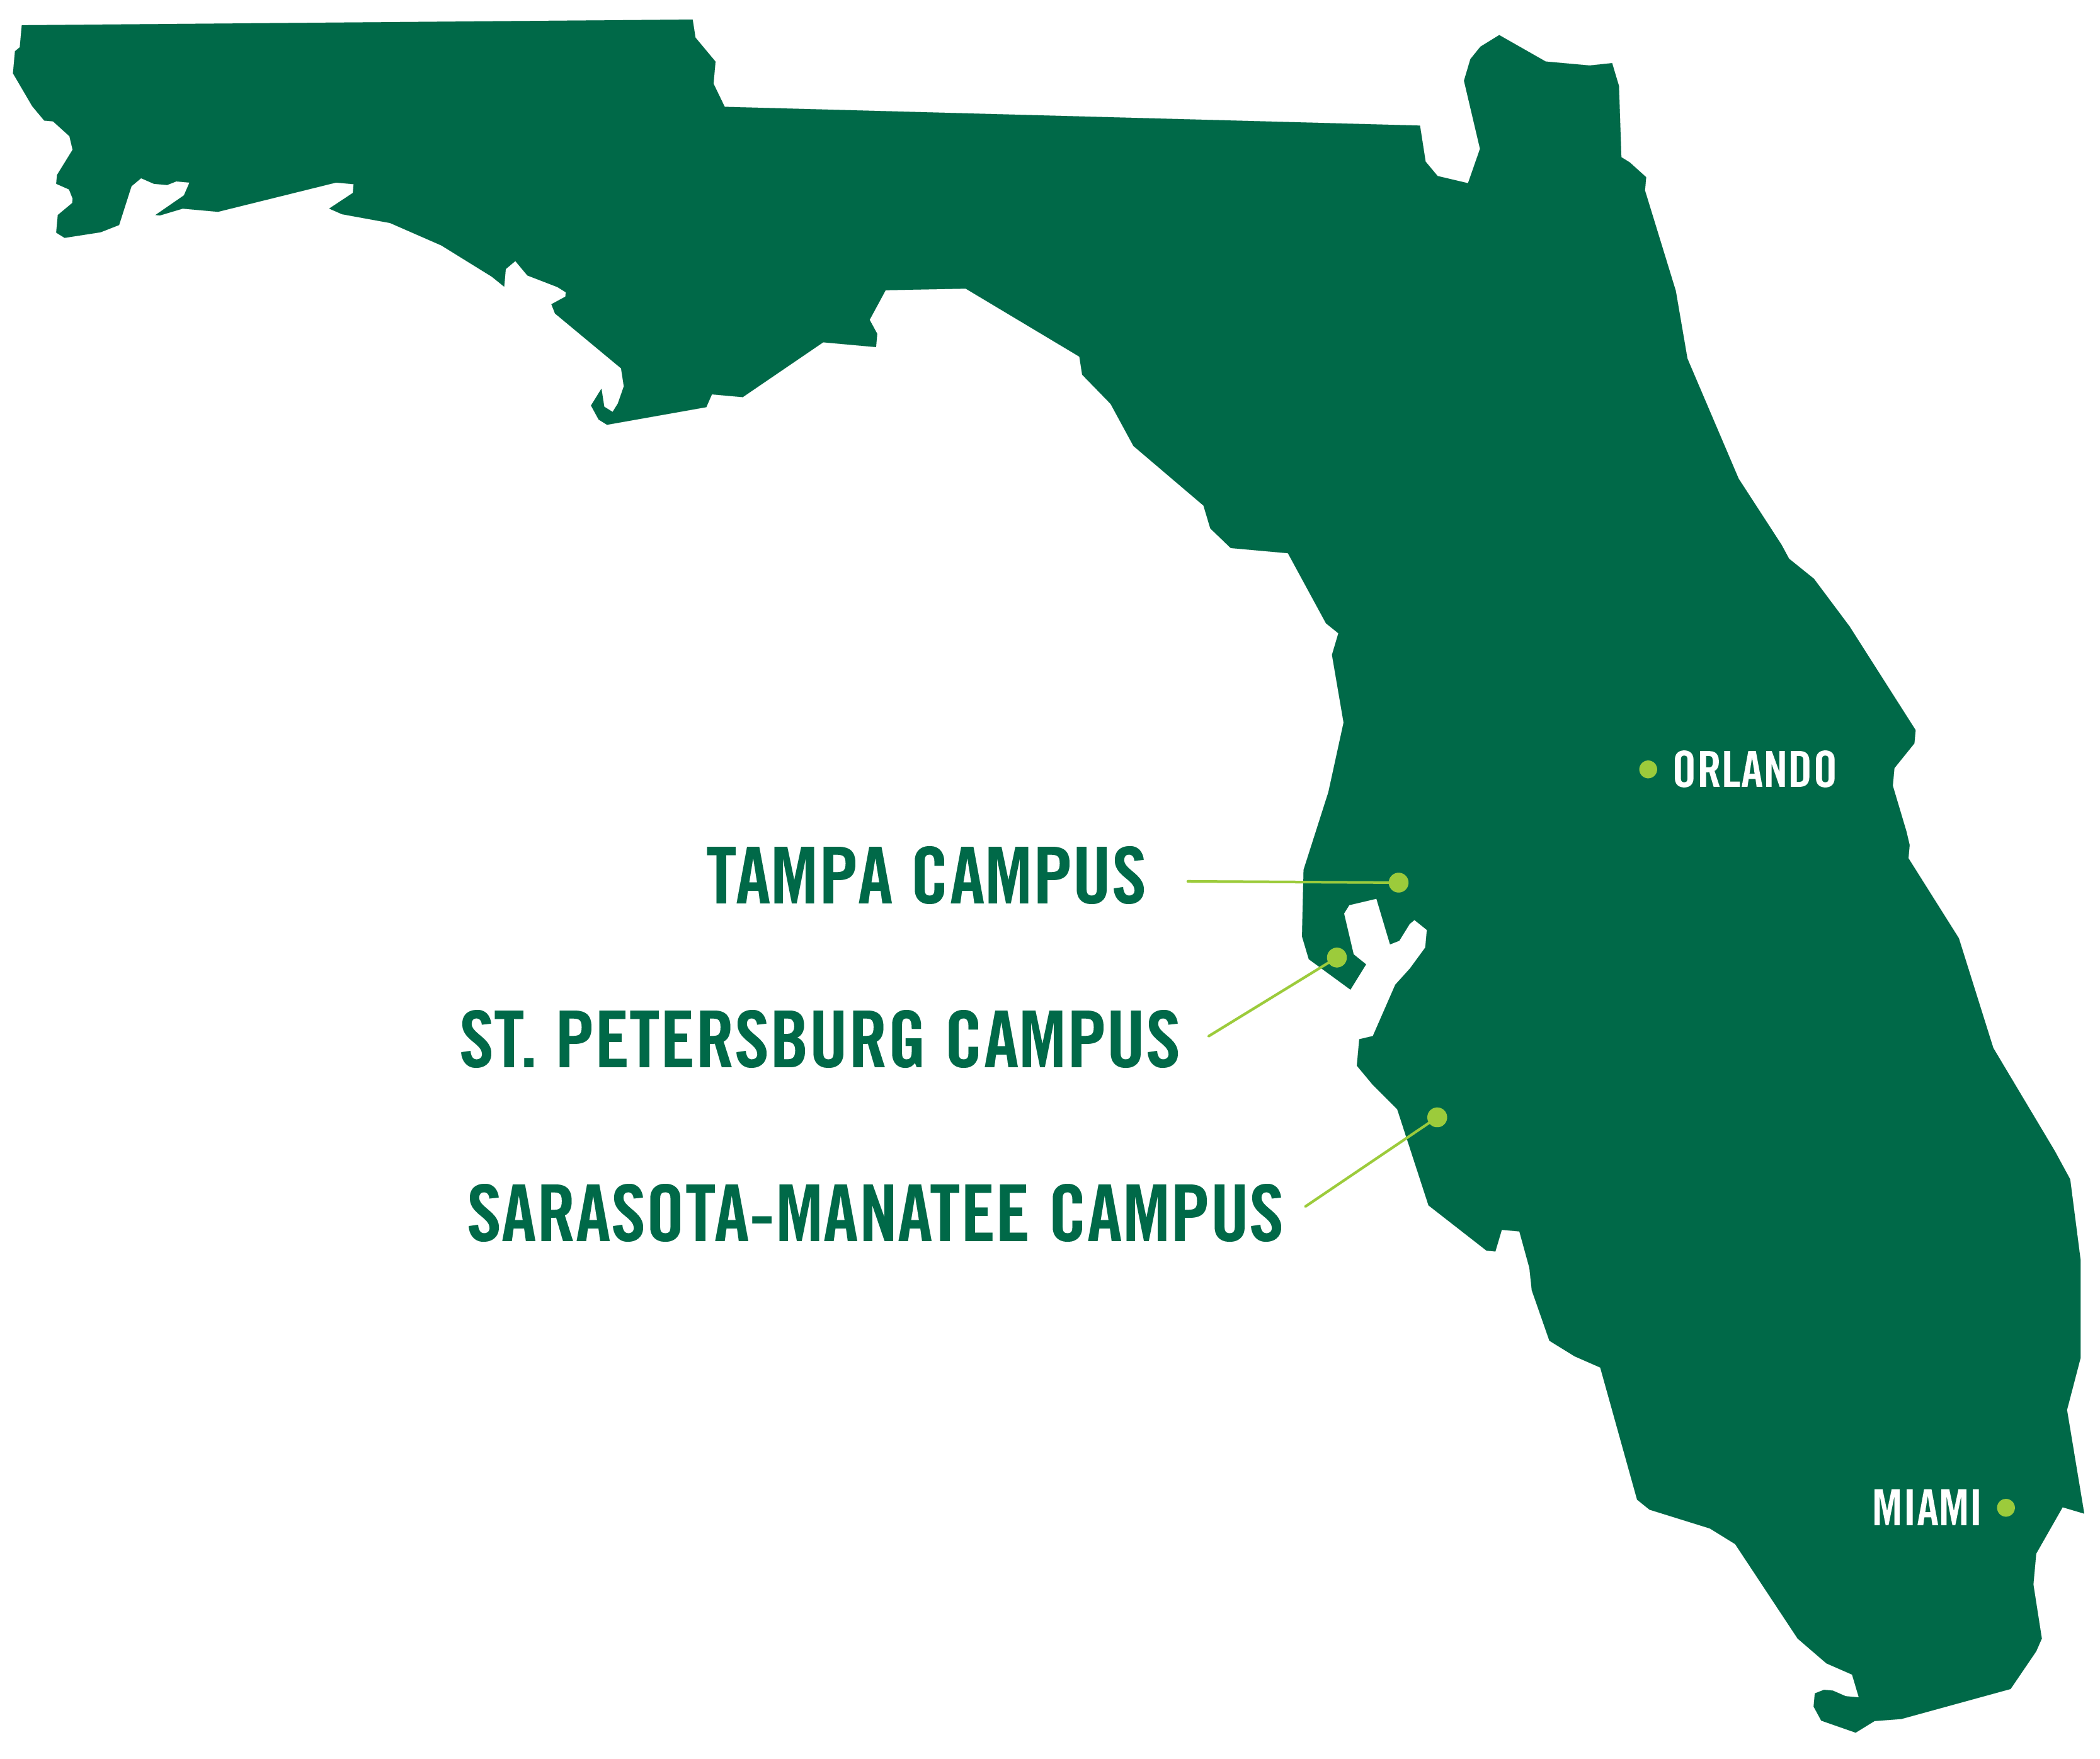 Map of Florida with all three USF campuses highlighted, along with the cities of Miami and Orlando